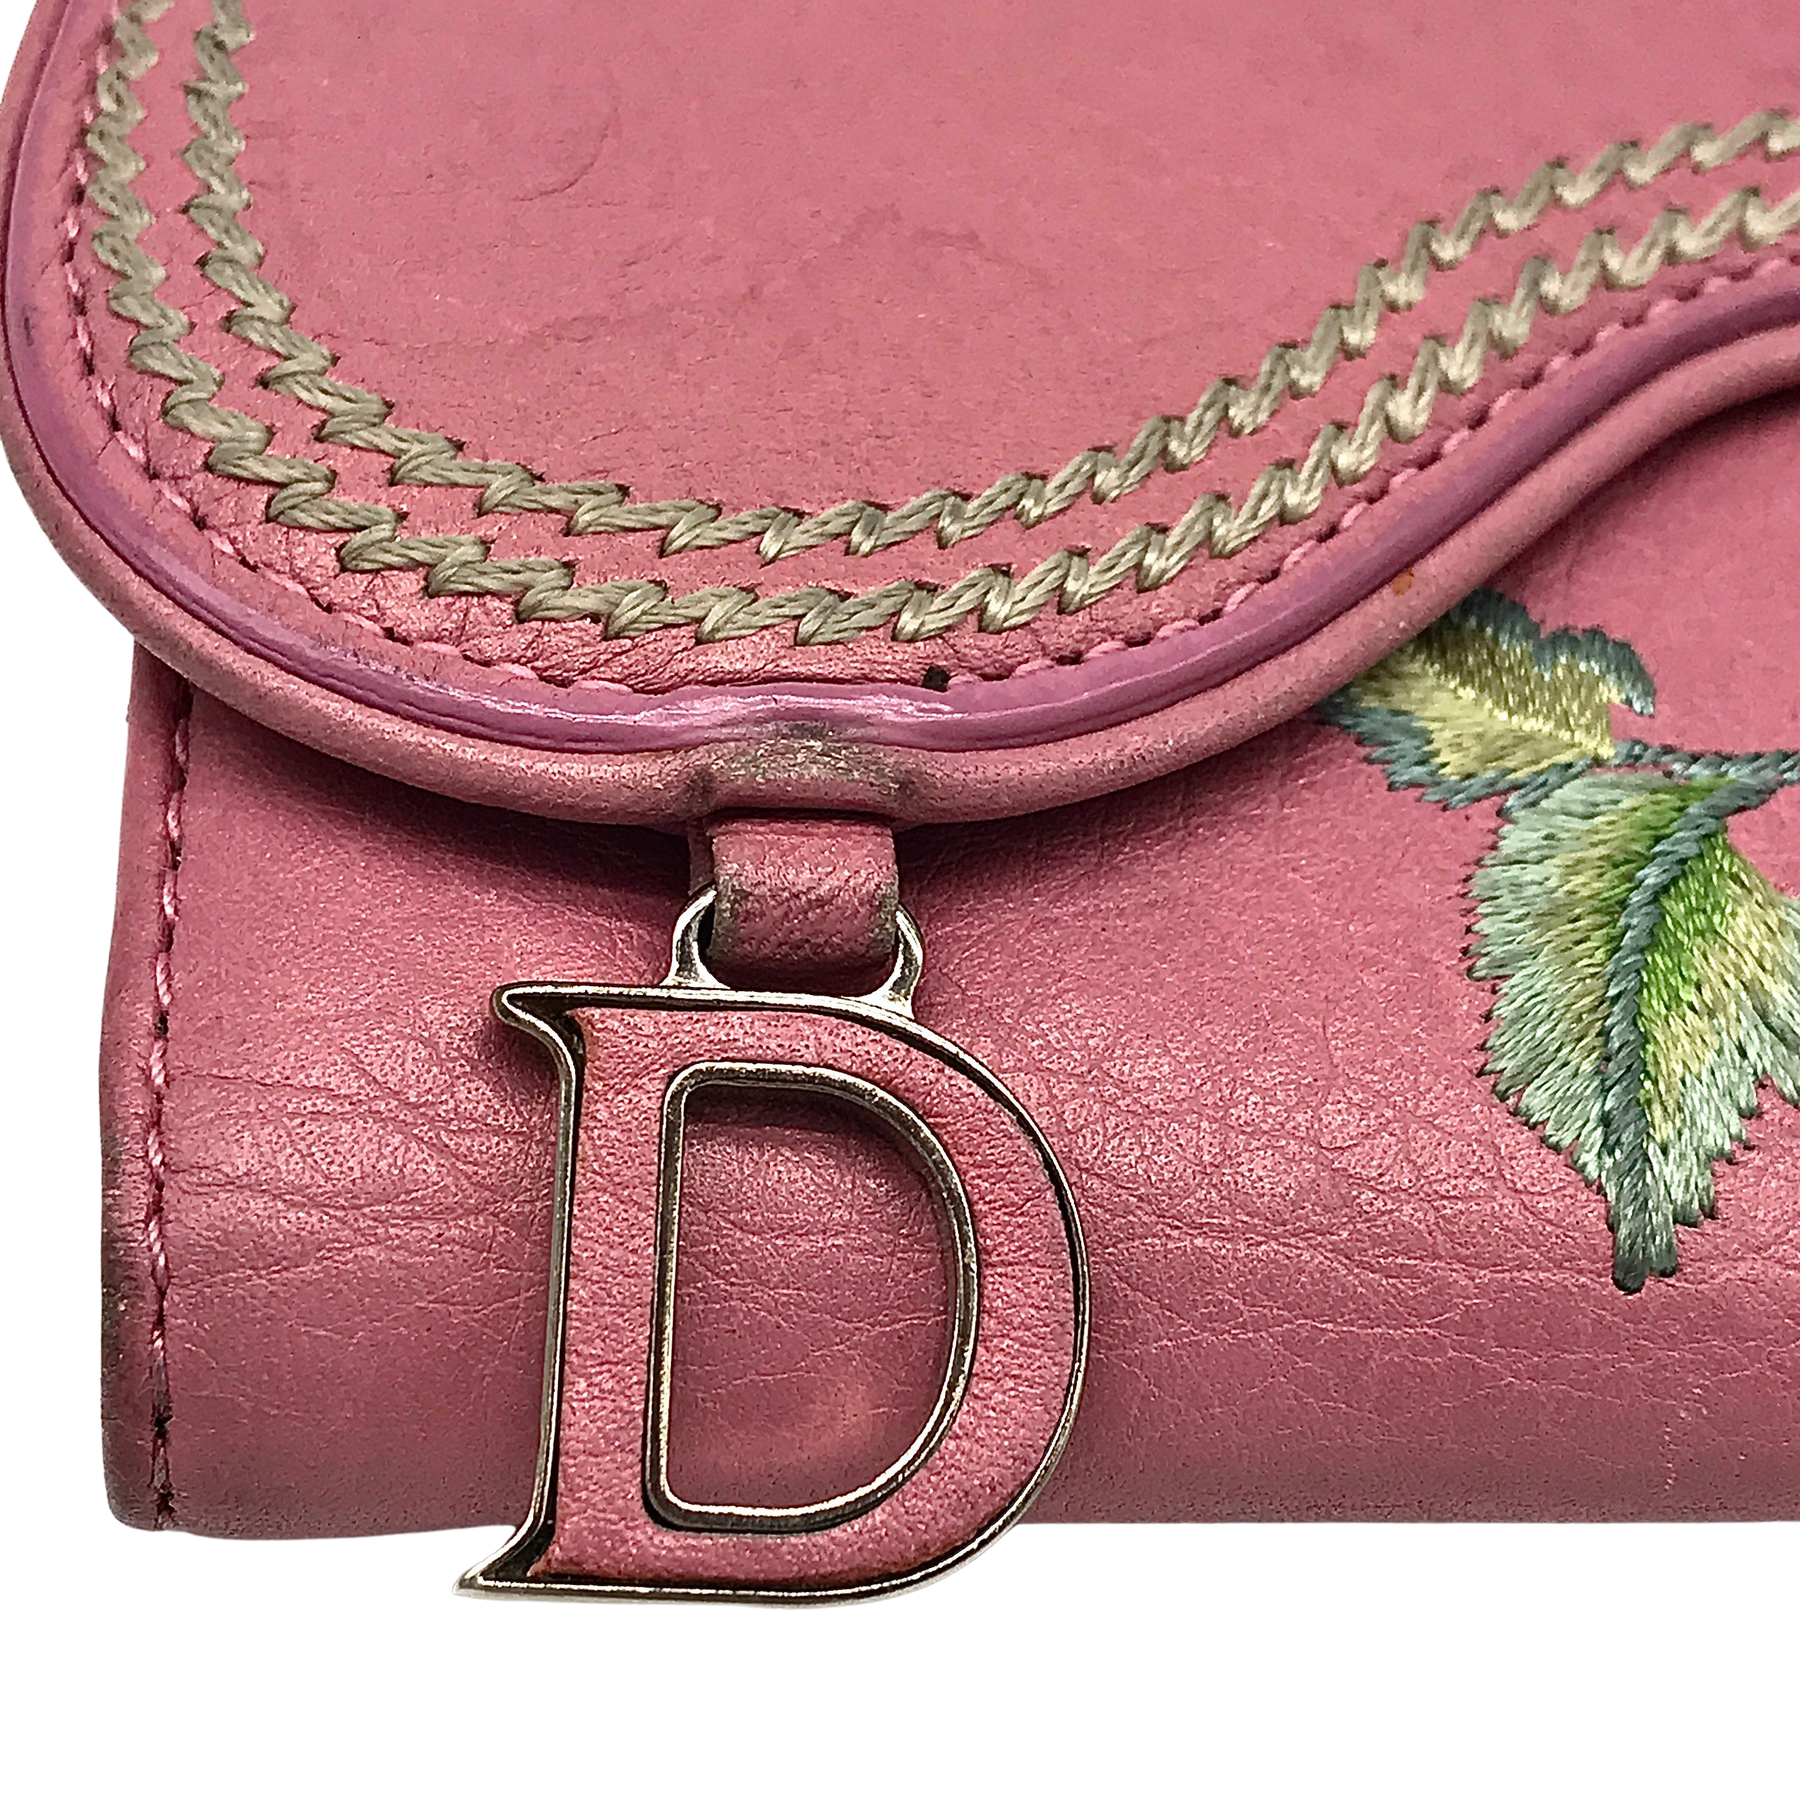 Dior, Bags, Authentic Christian Dior 6 Ring Key Holder